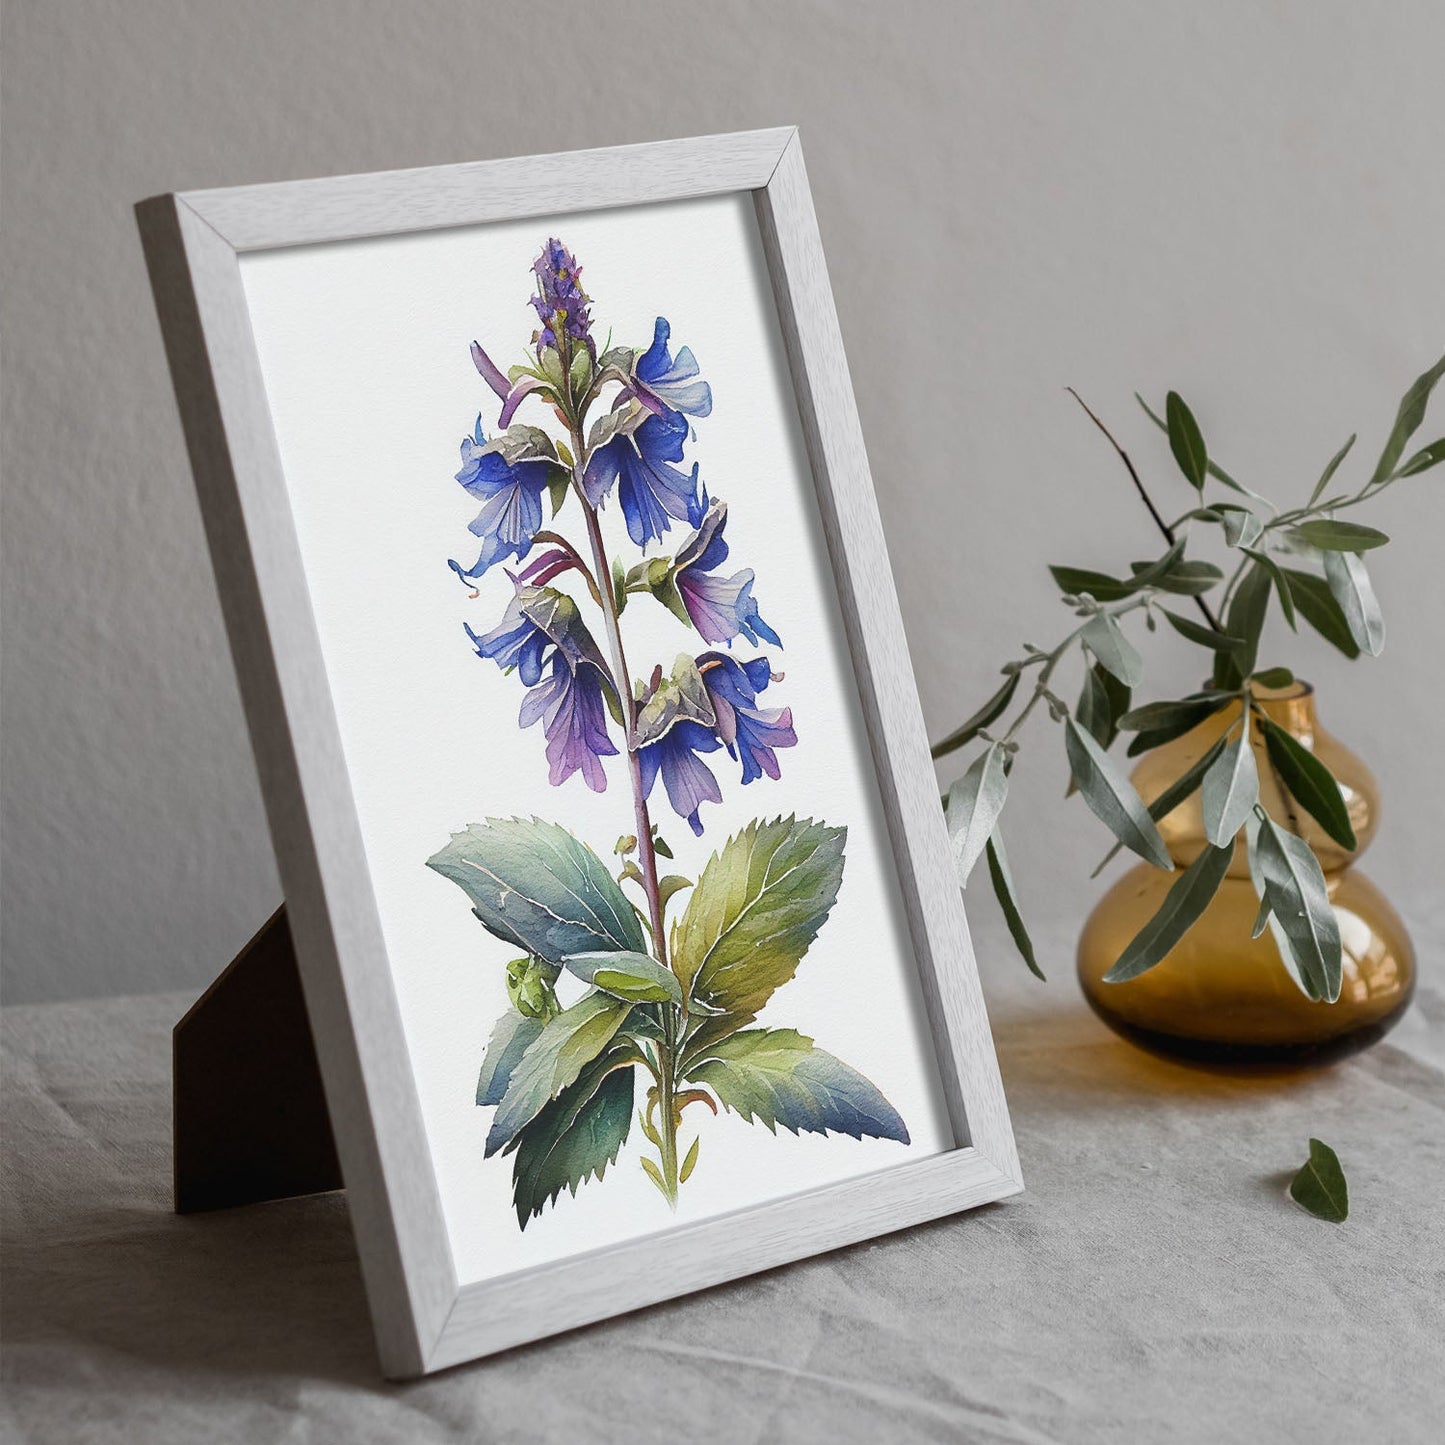 Nacnic watercolor minmal Borage_1. Aesthetic Wall Art Prints for Bedroom or Living Room Design.